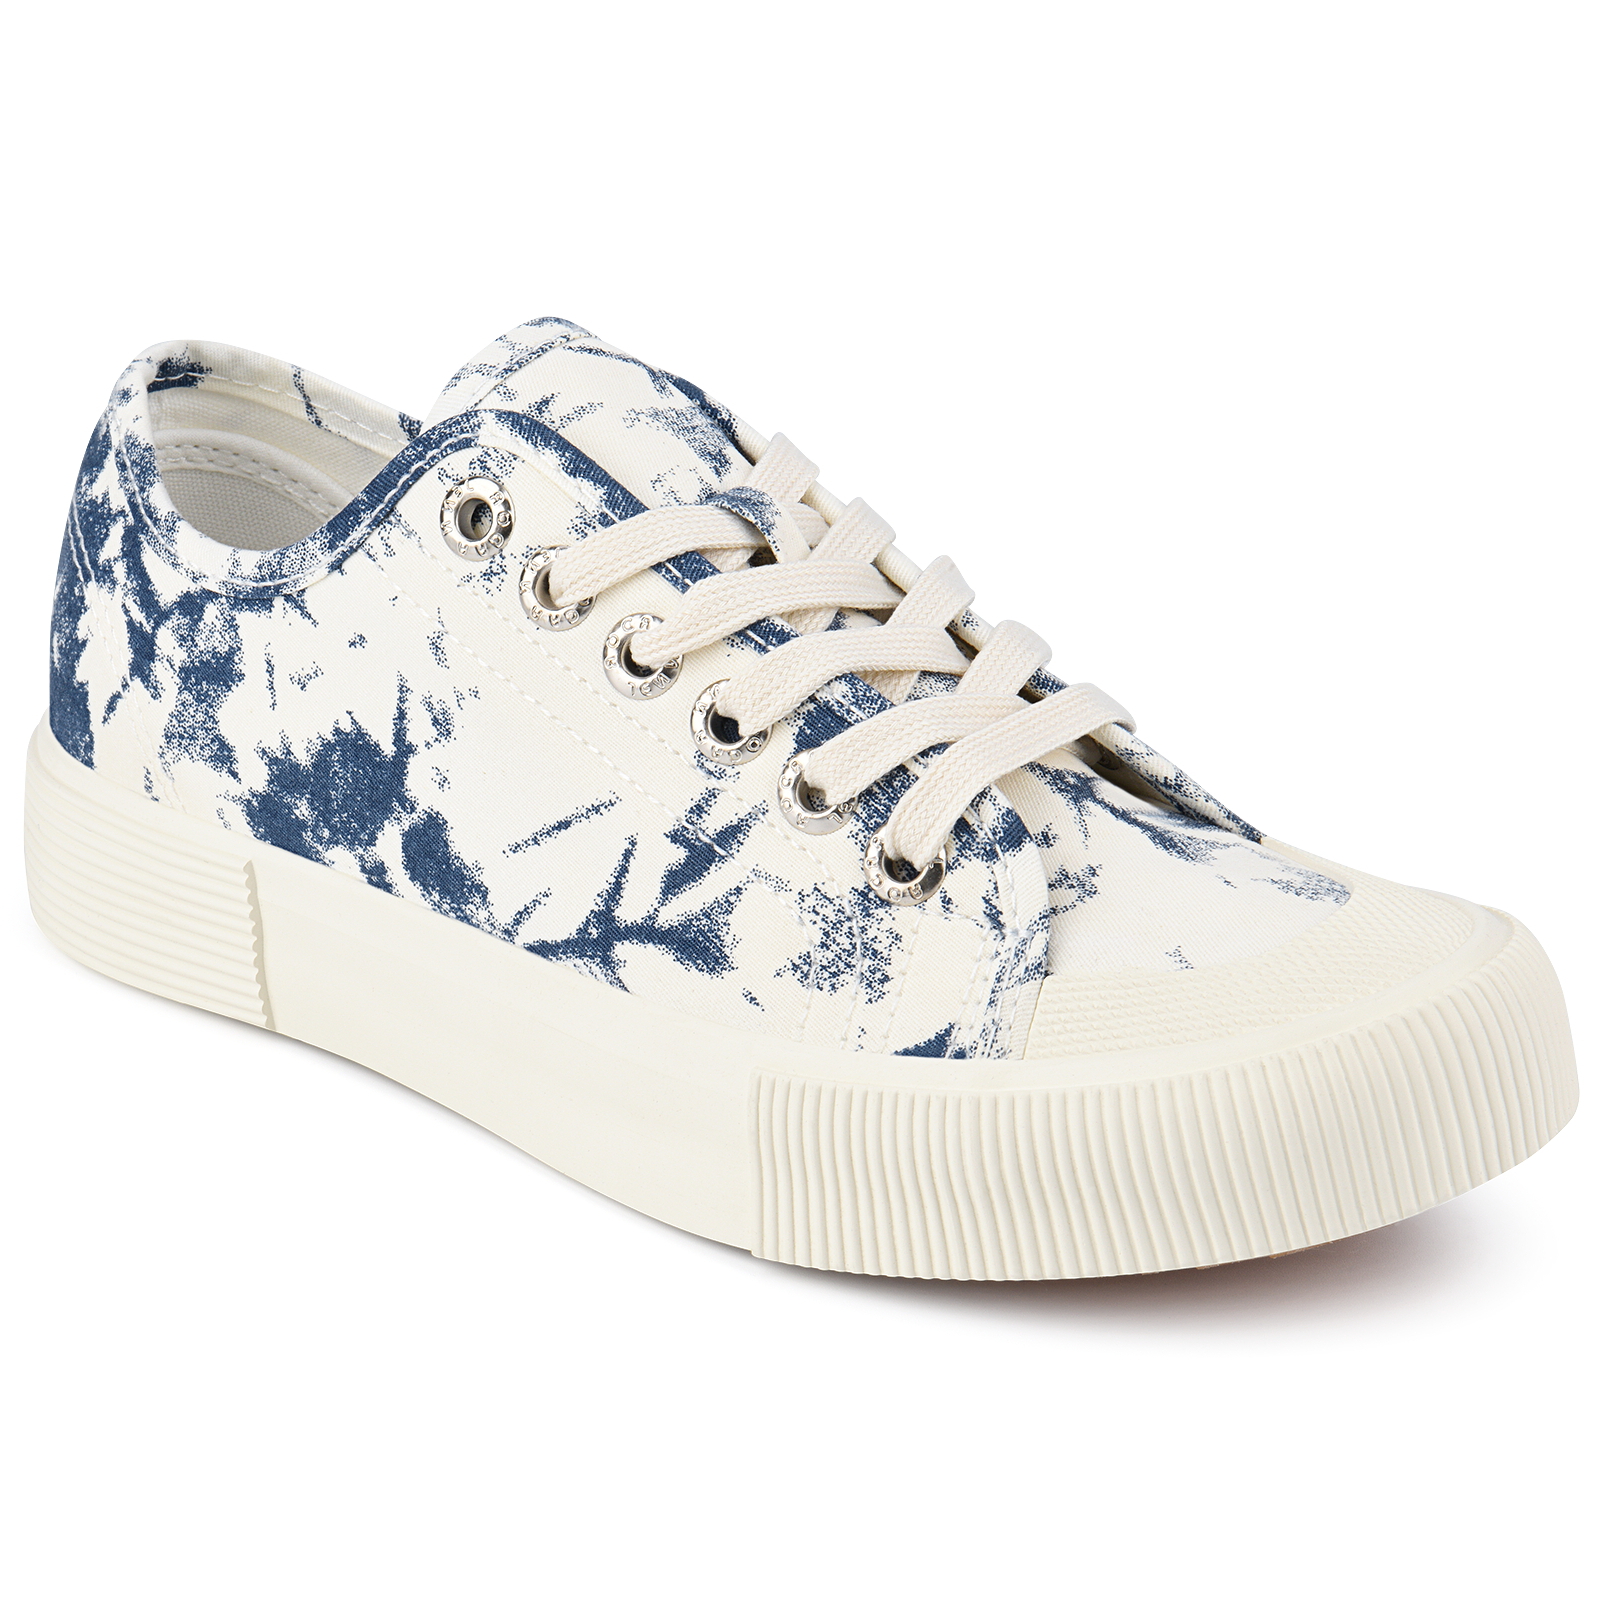 JENN ARDOR Womens Canvas Shoes Low Tops Lace up Fashion Sneakers for Walking Tennis - image 5 of 8